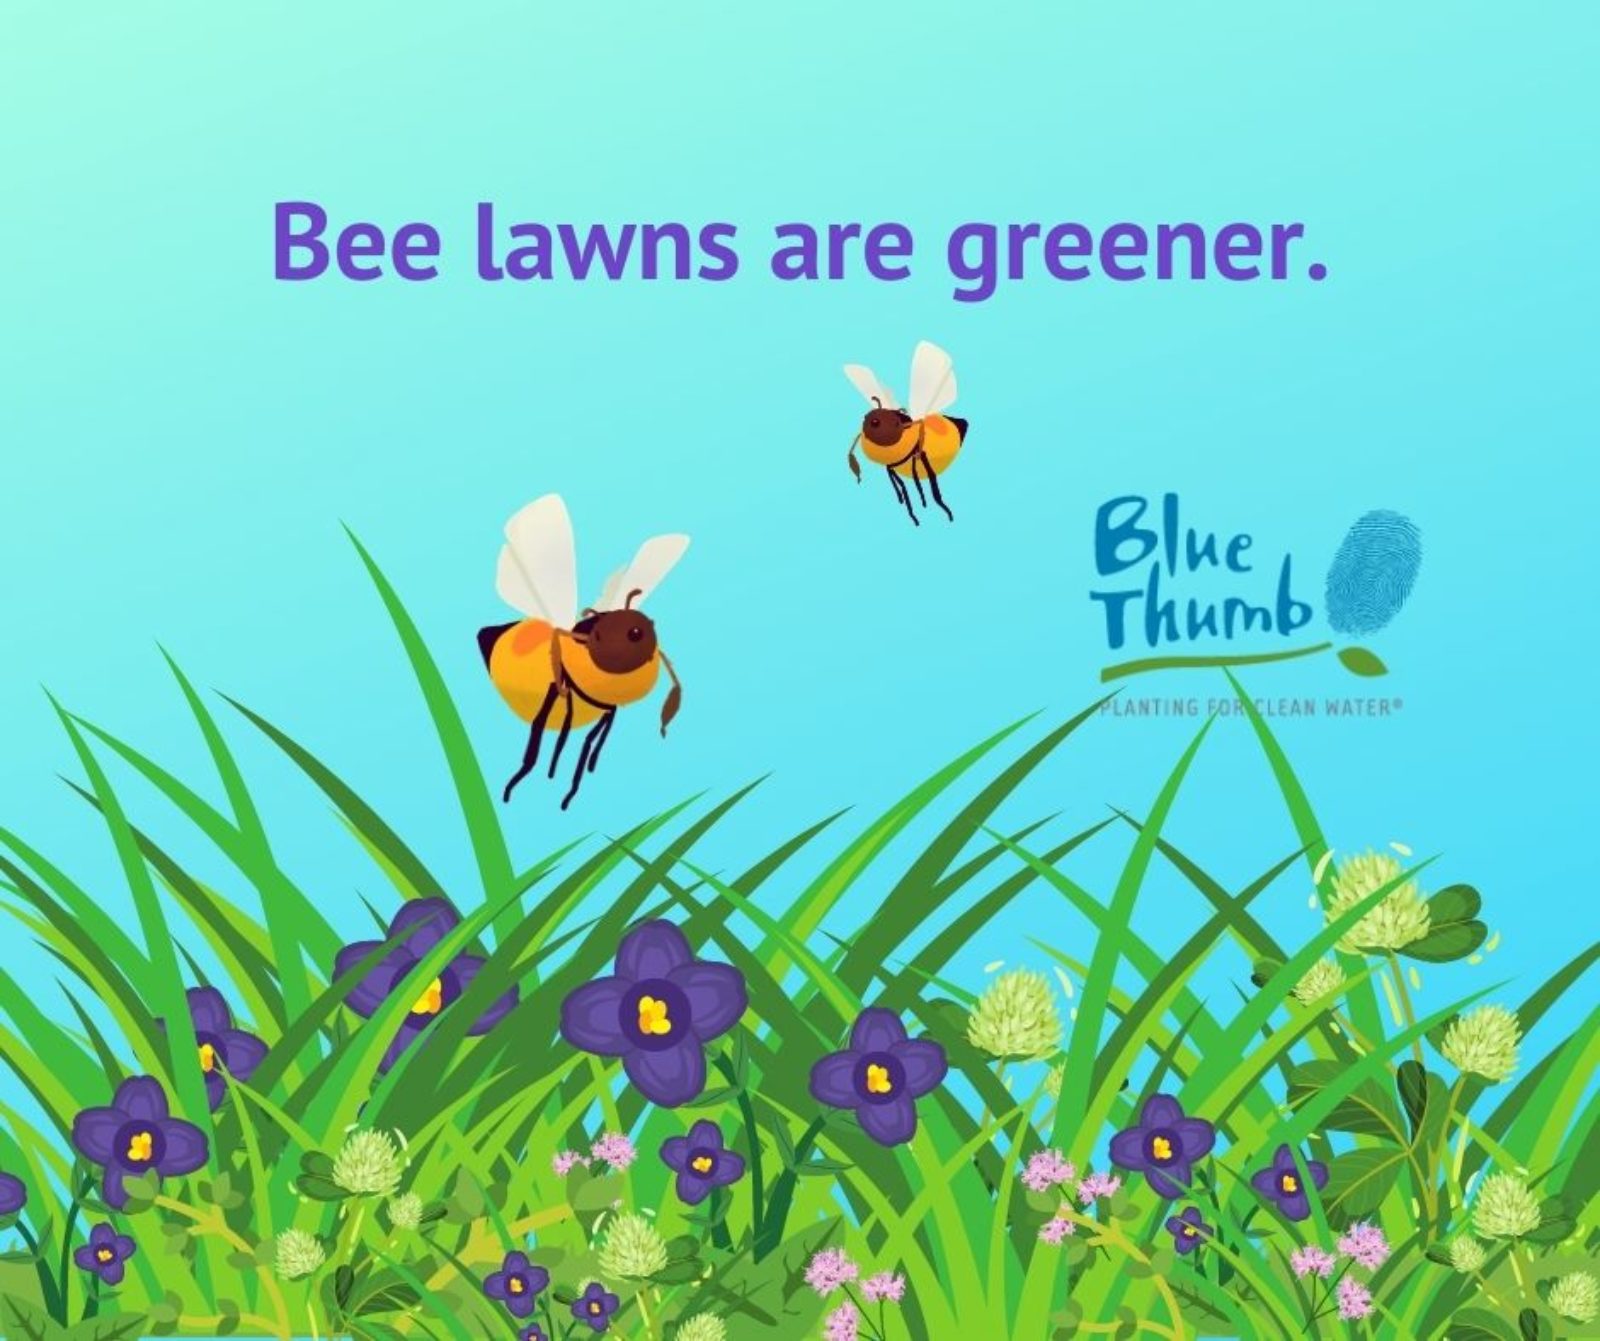 Bee lawns are greener. Photo of cartoon bees.